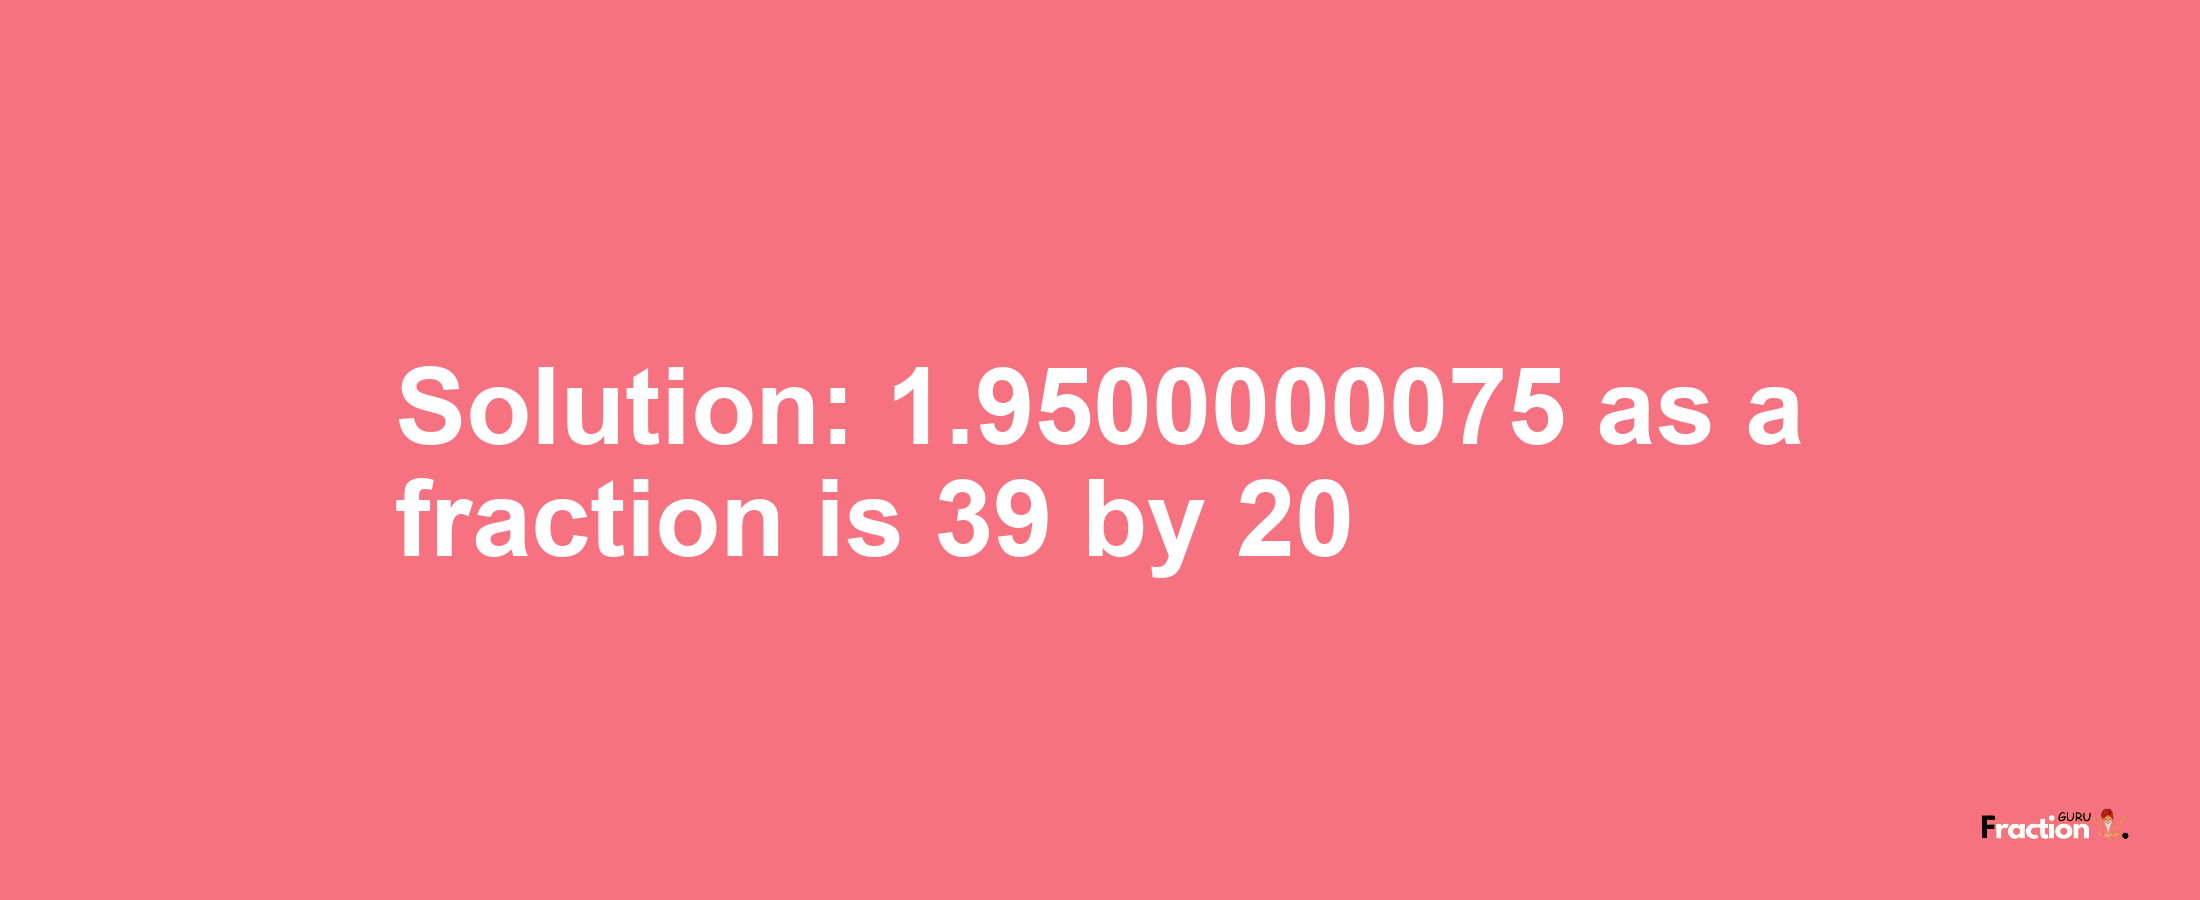 Solution:1.9500000075 as a fraction is 39/20